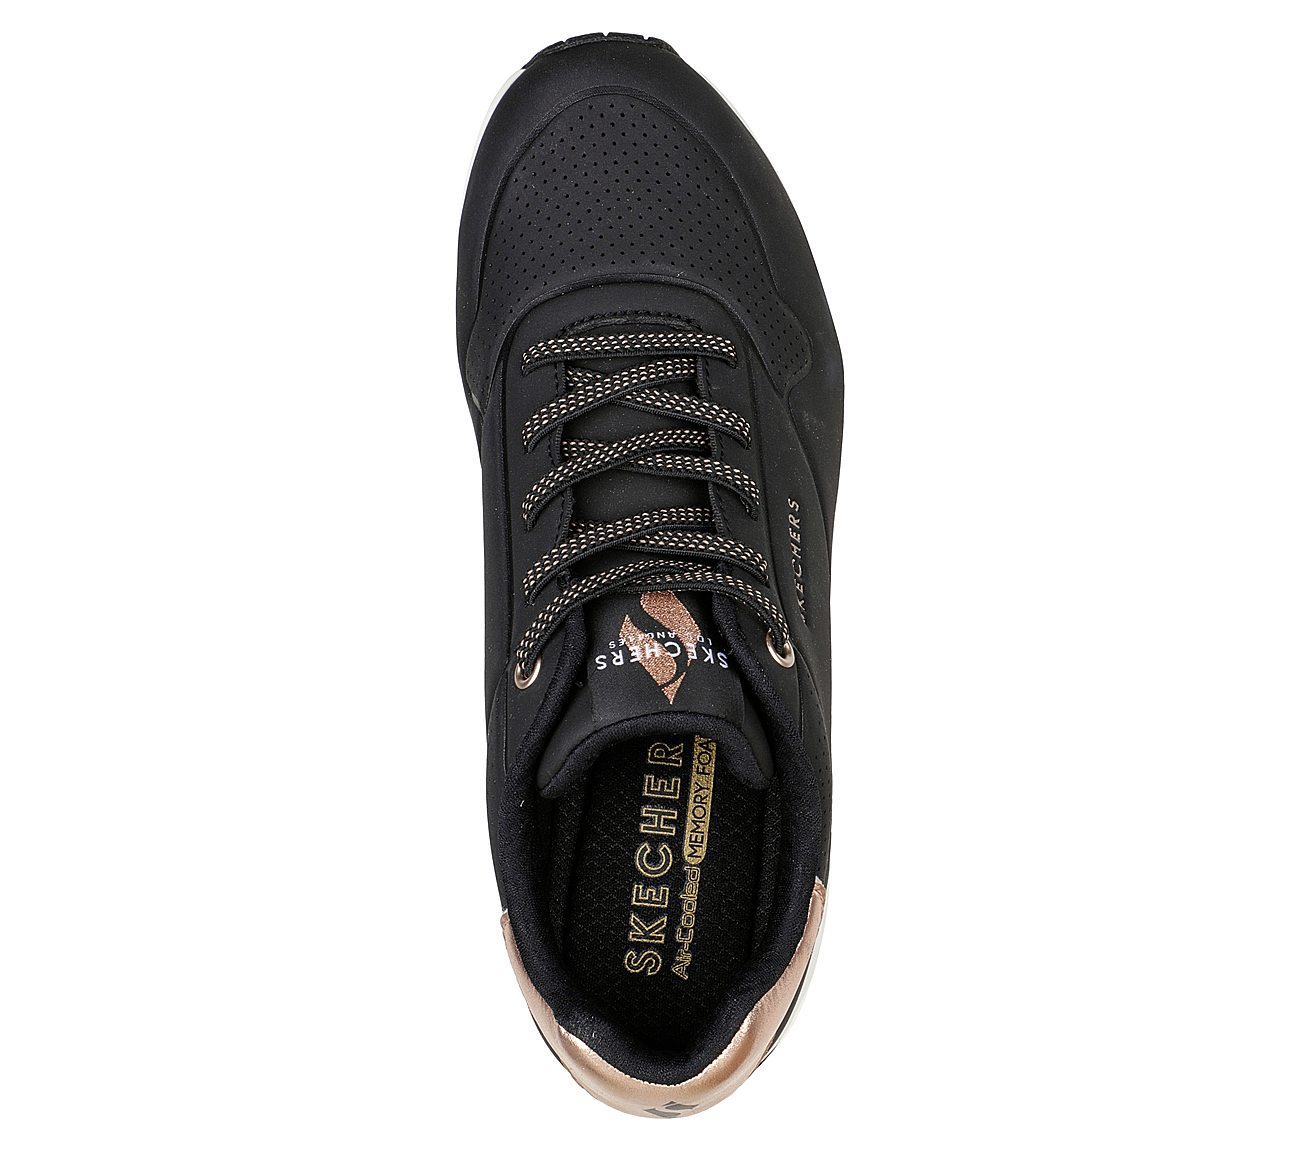 UNO - SHIMMER AWAY, BBBBLACK Footwear Top View